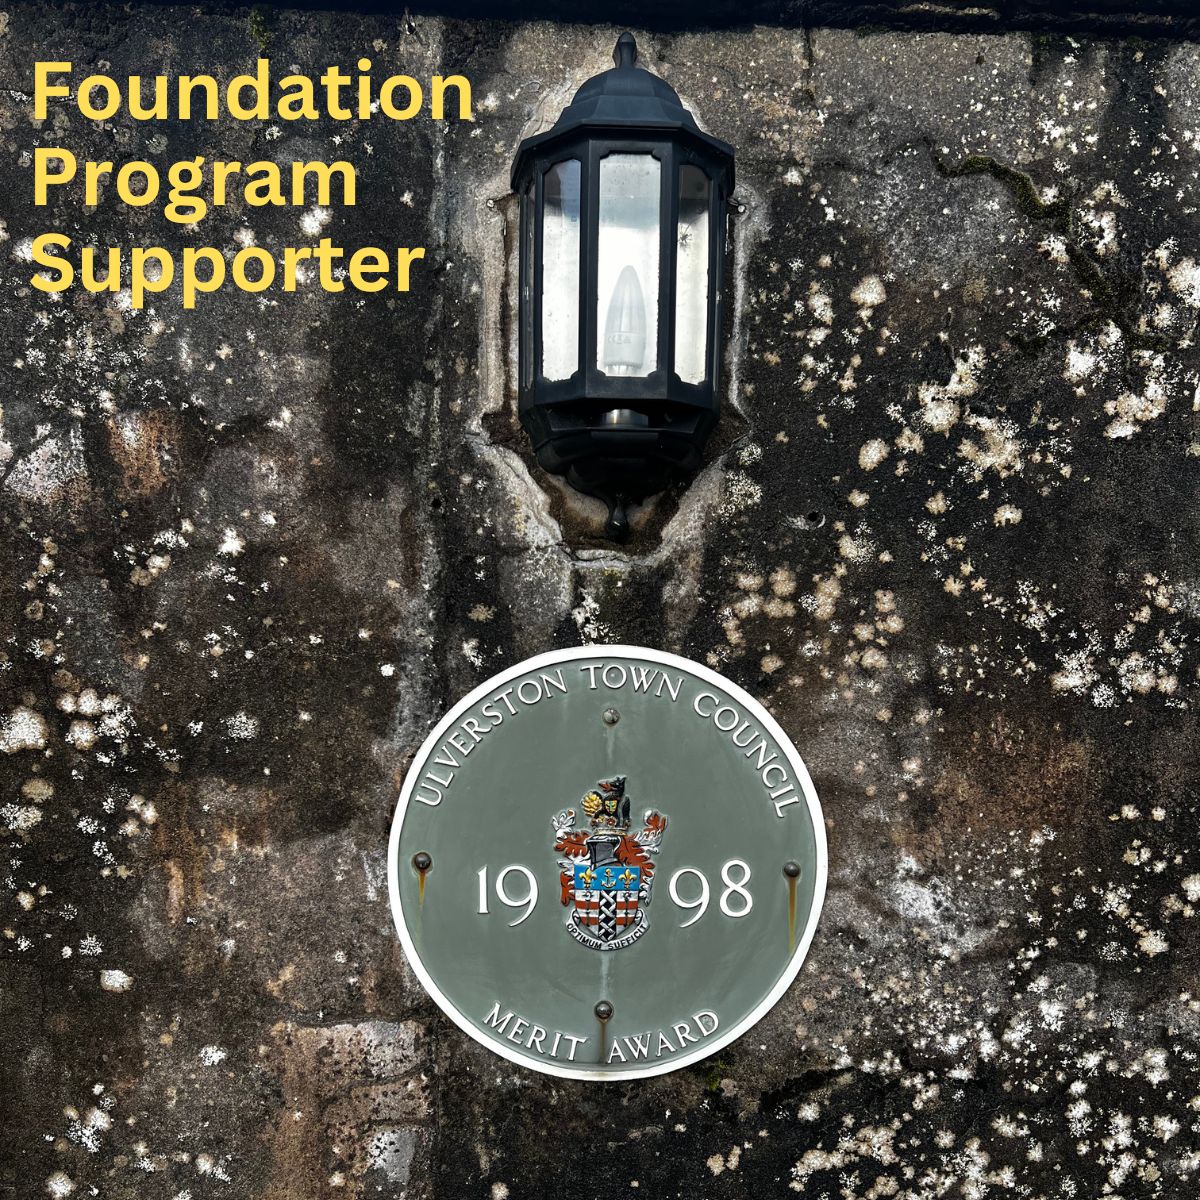 Become a Foundation Program Supporter - Level 2